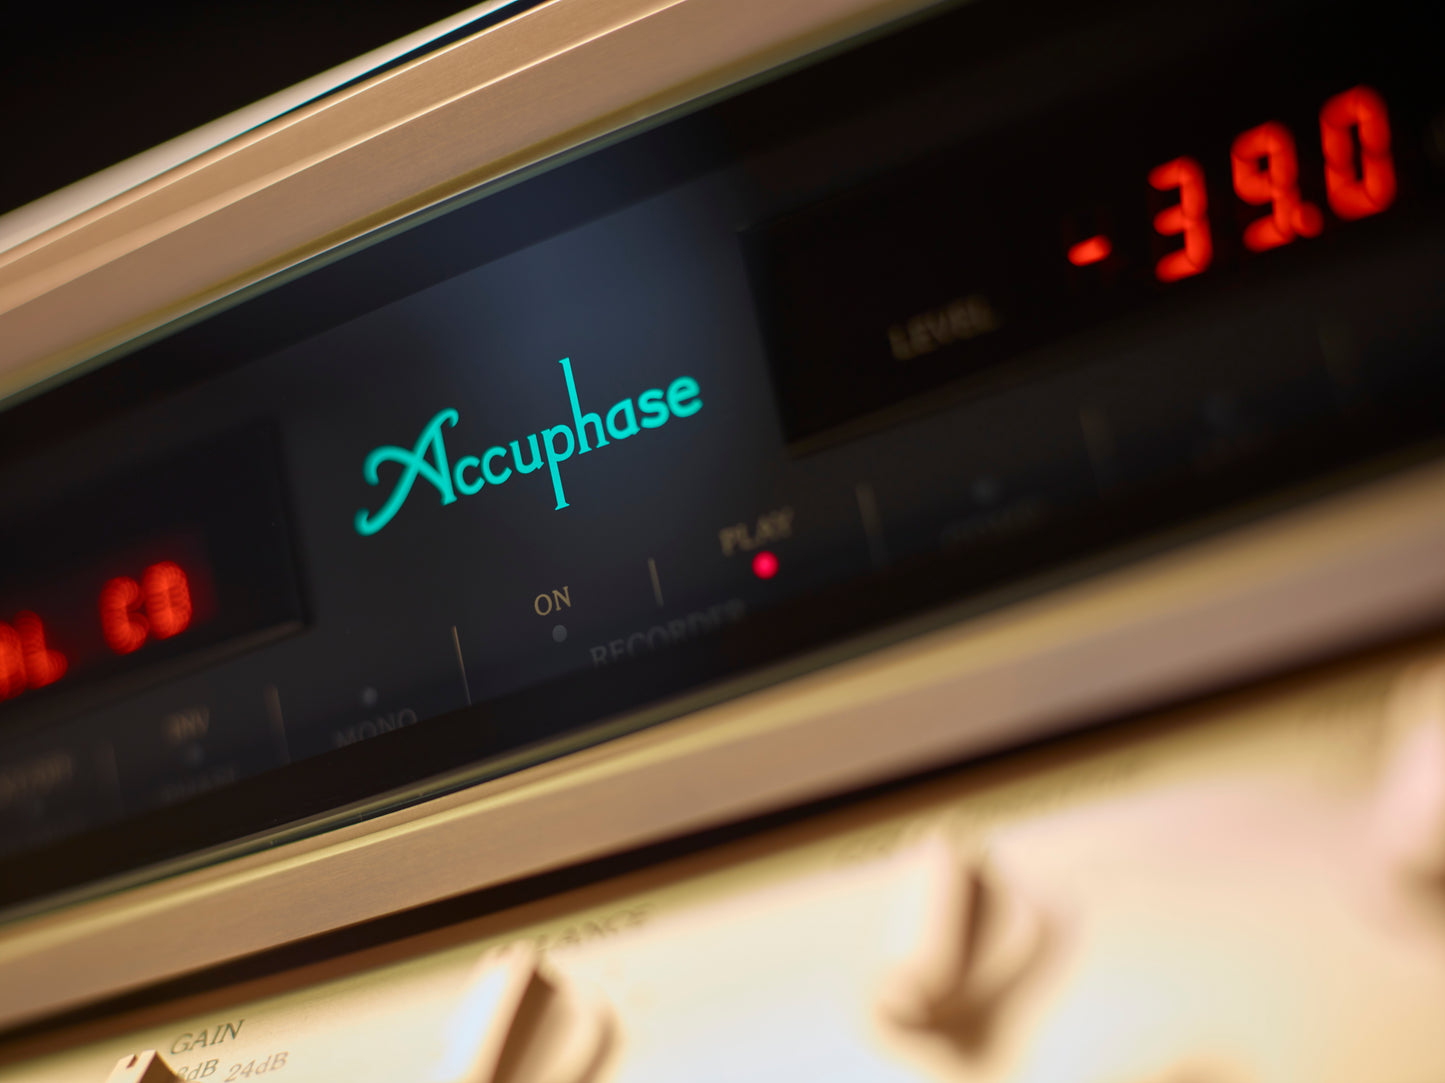 ACCUPHASE C-3900